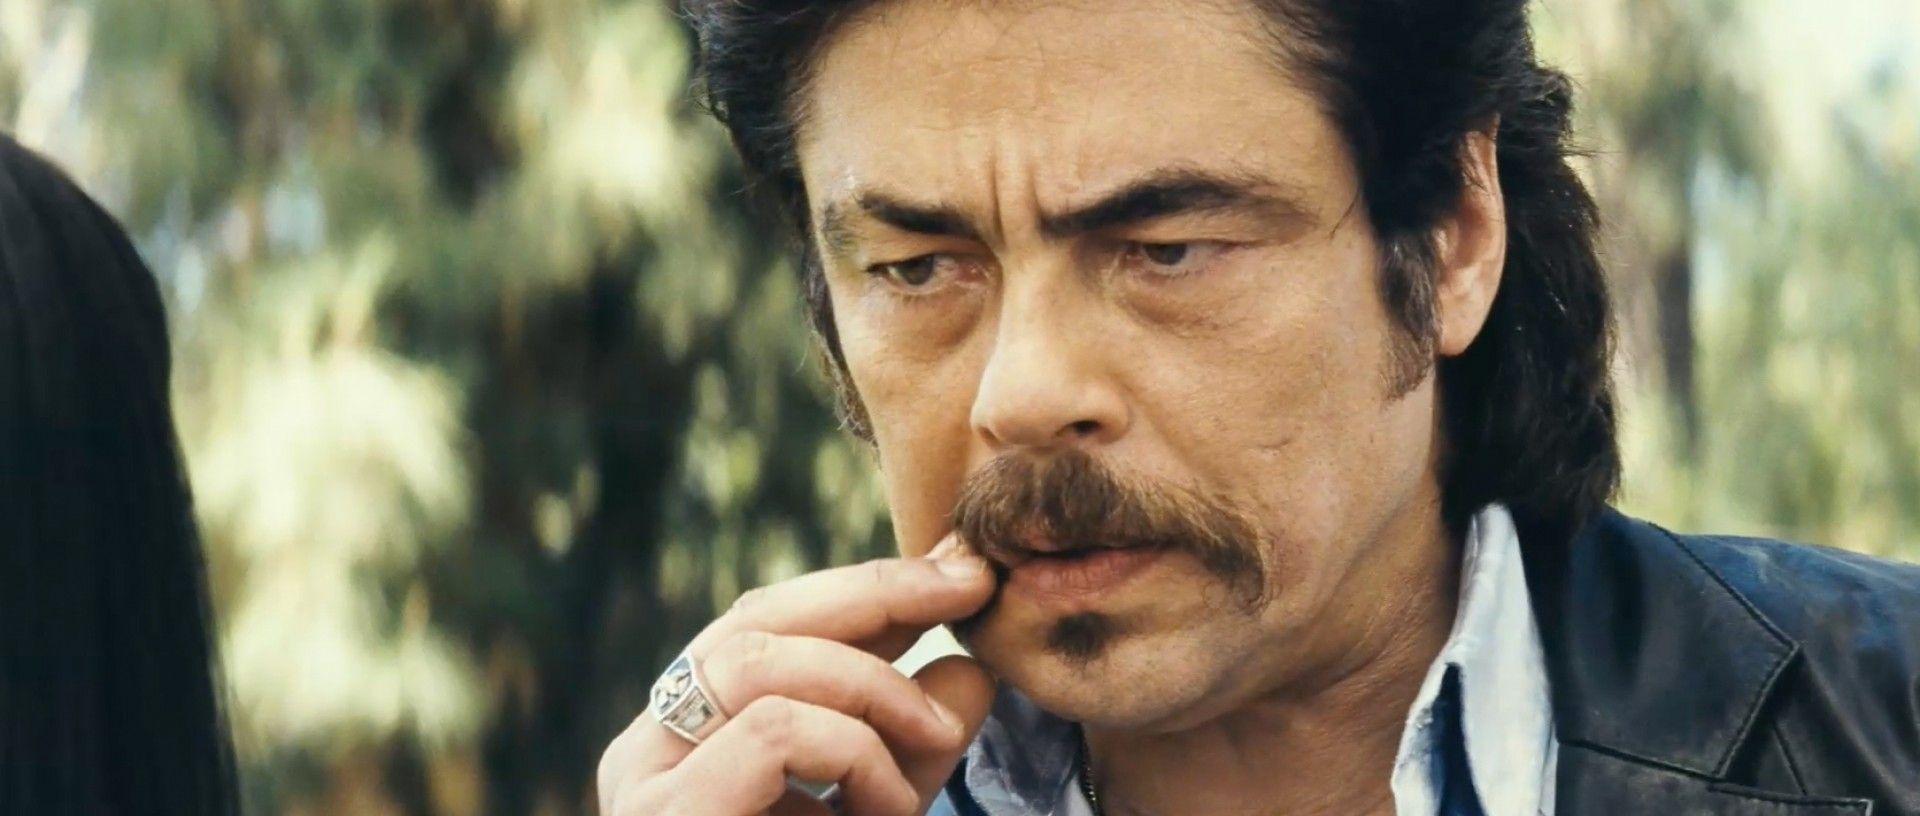 Benicio del Toro Teases About Whether or Not His Star Wars